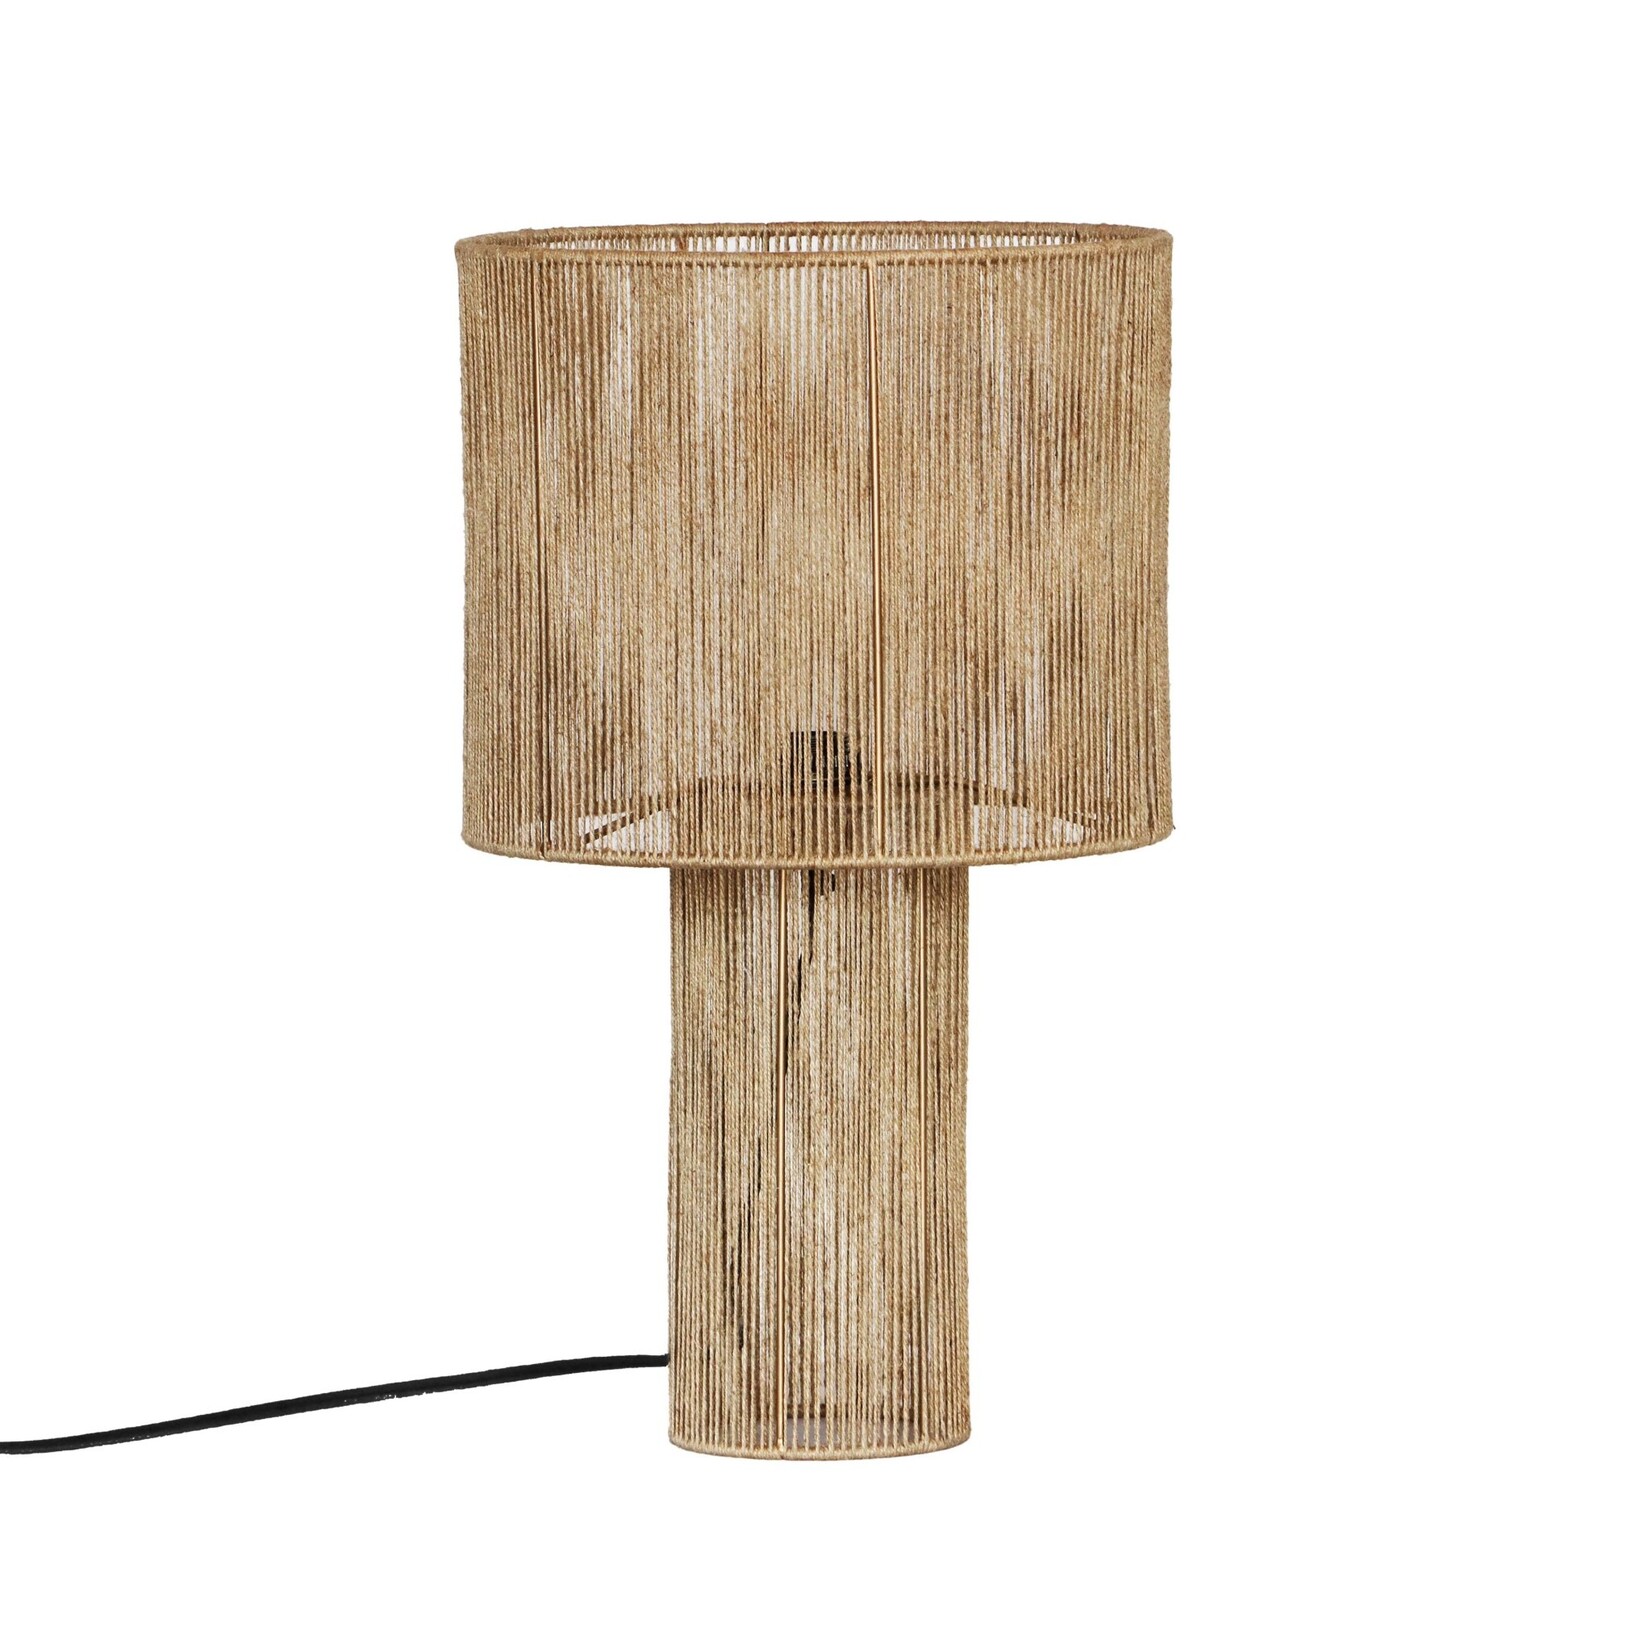 Tov POEE NATURAL TABLE LAMP